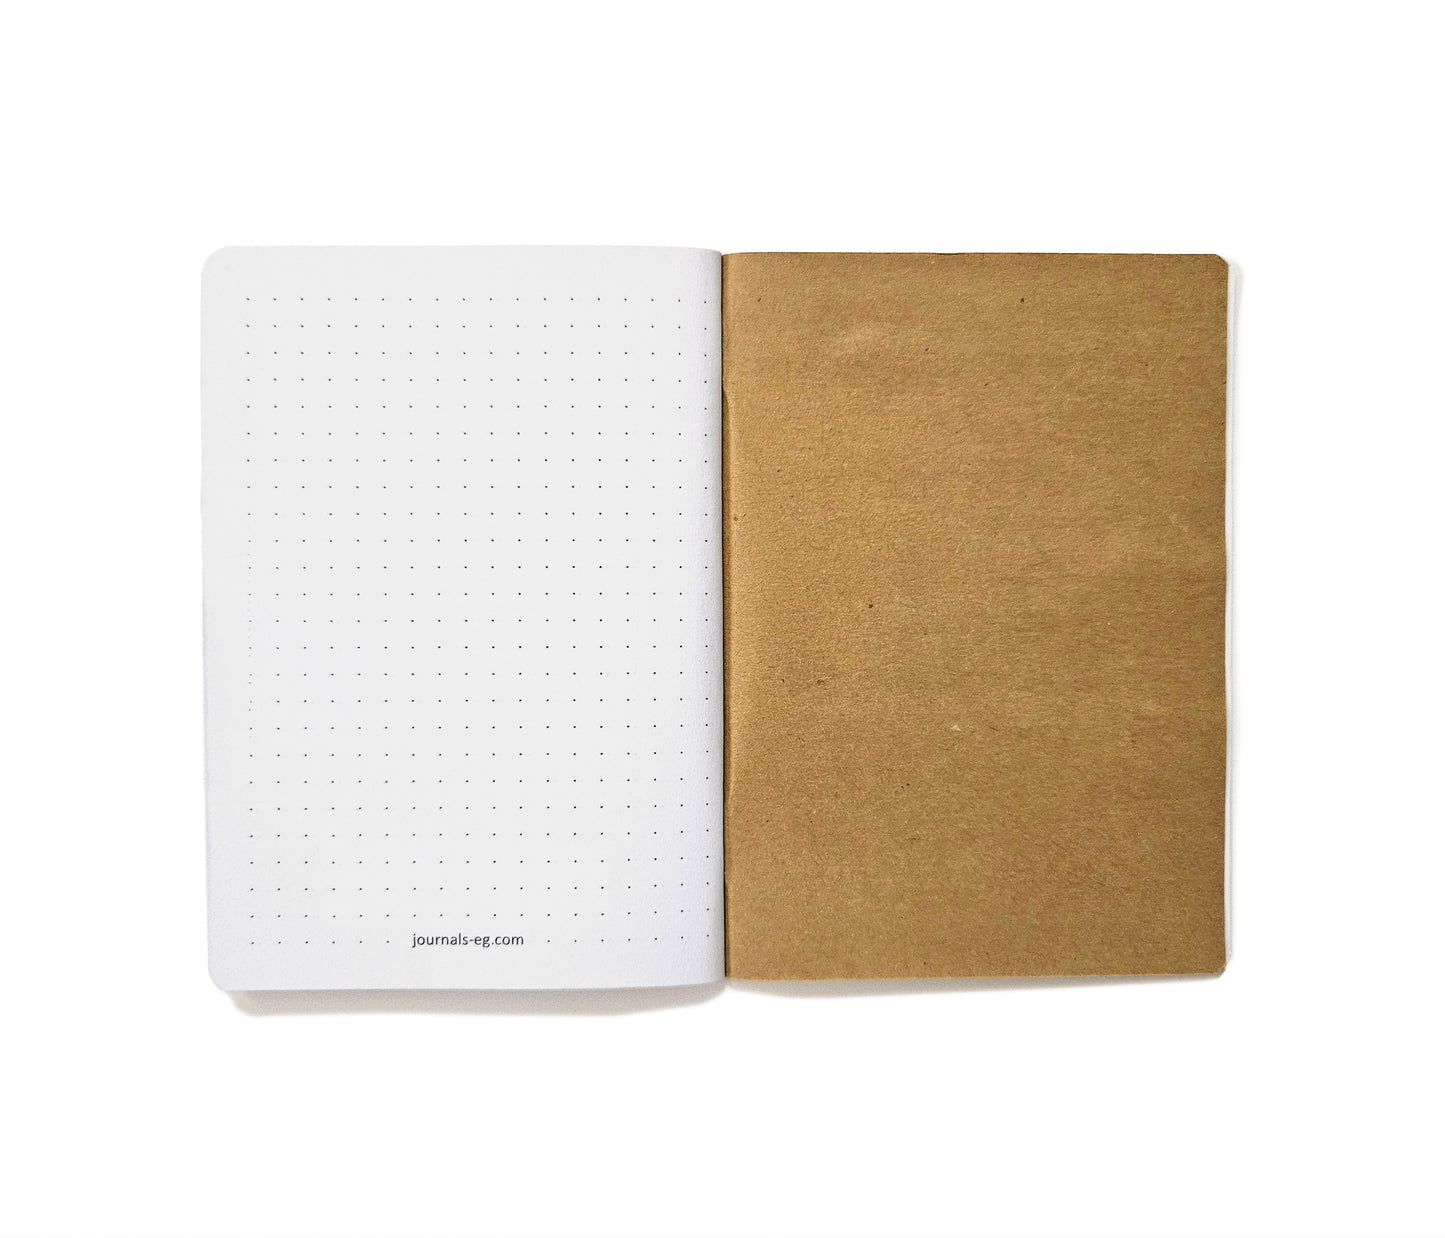 DB book | 14 x 10 cm - 52 Dotted Pages - (White) Design Bases